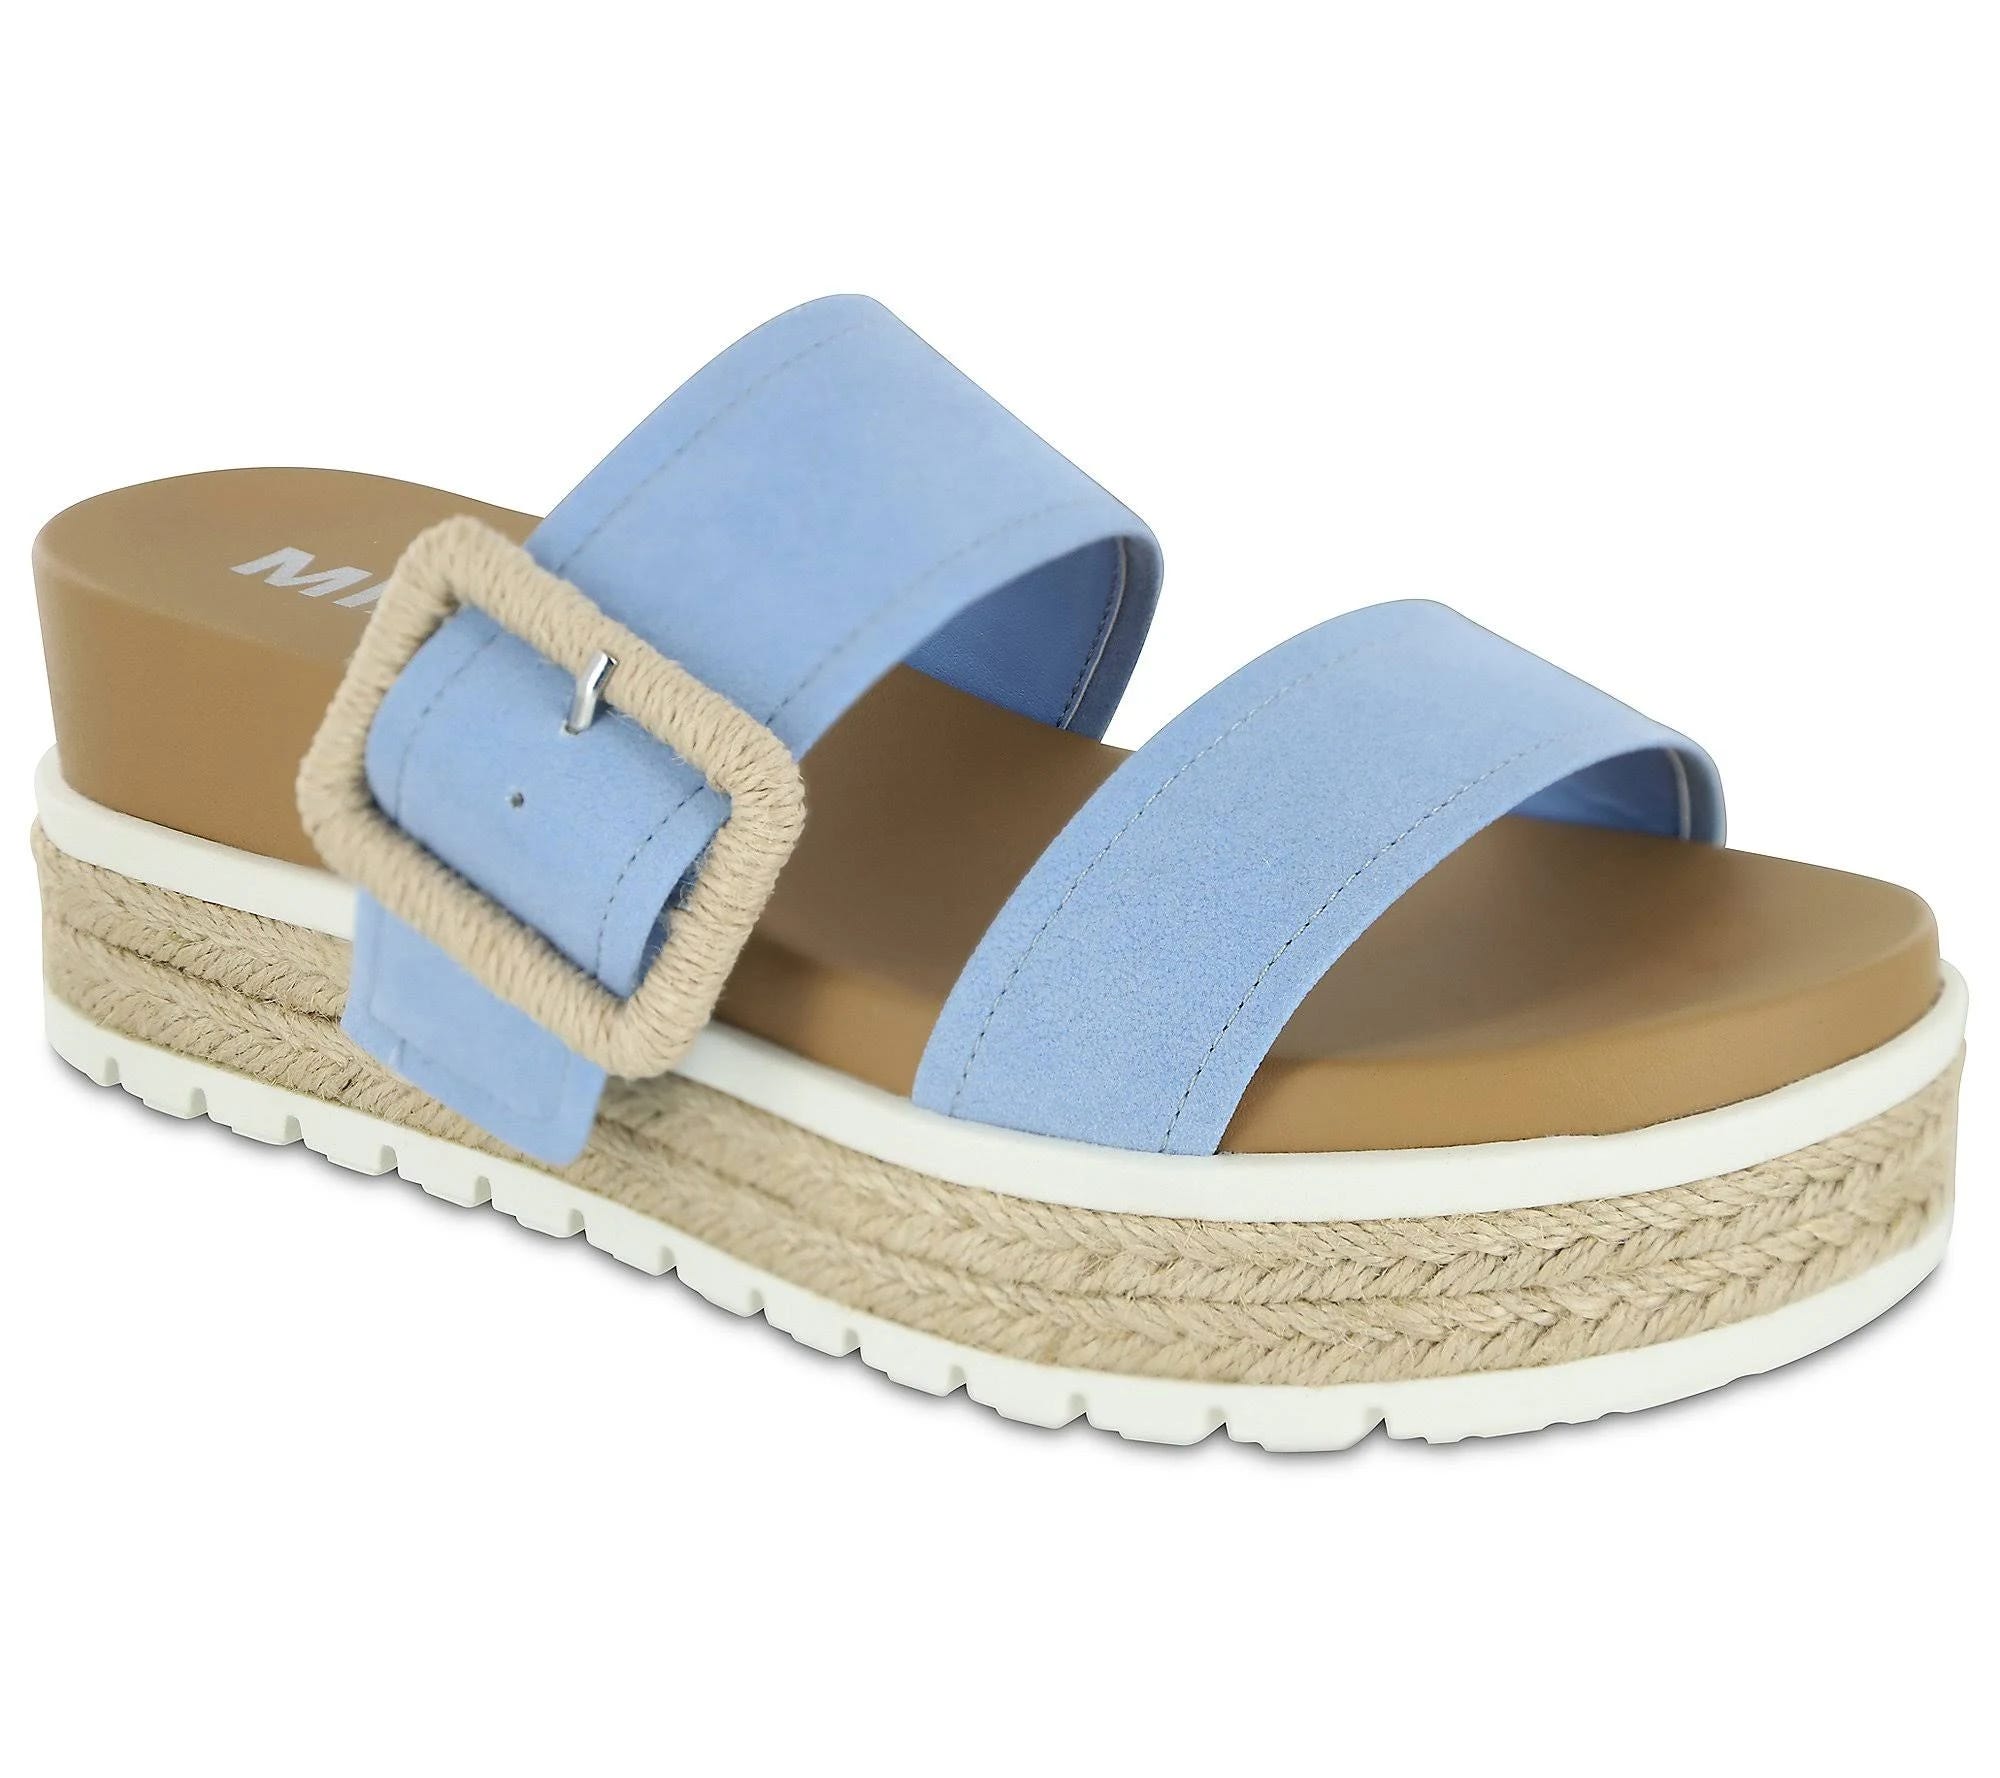 Comfortable summer platform sandals for a chic look | Image